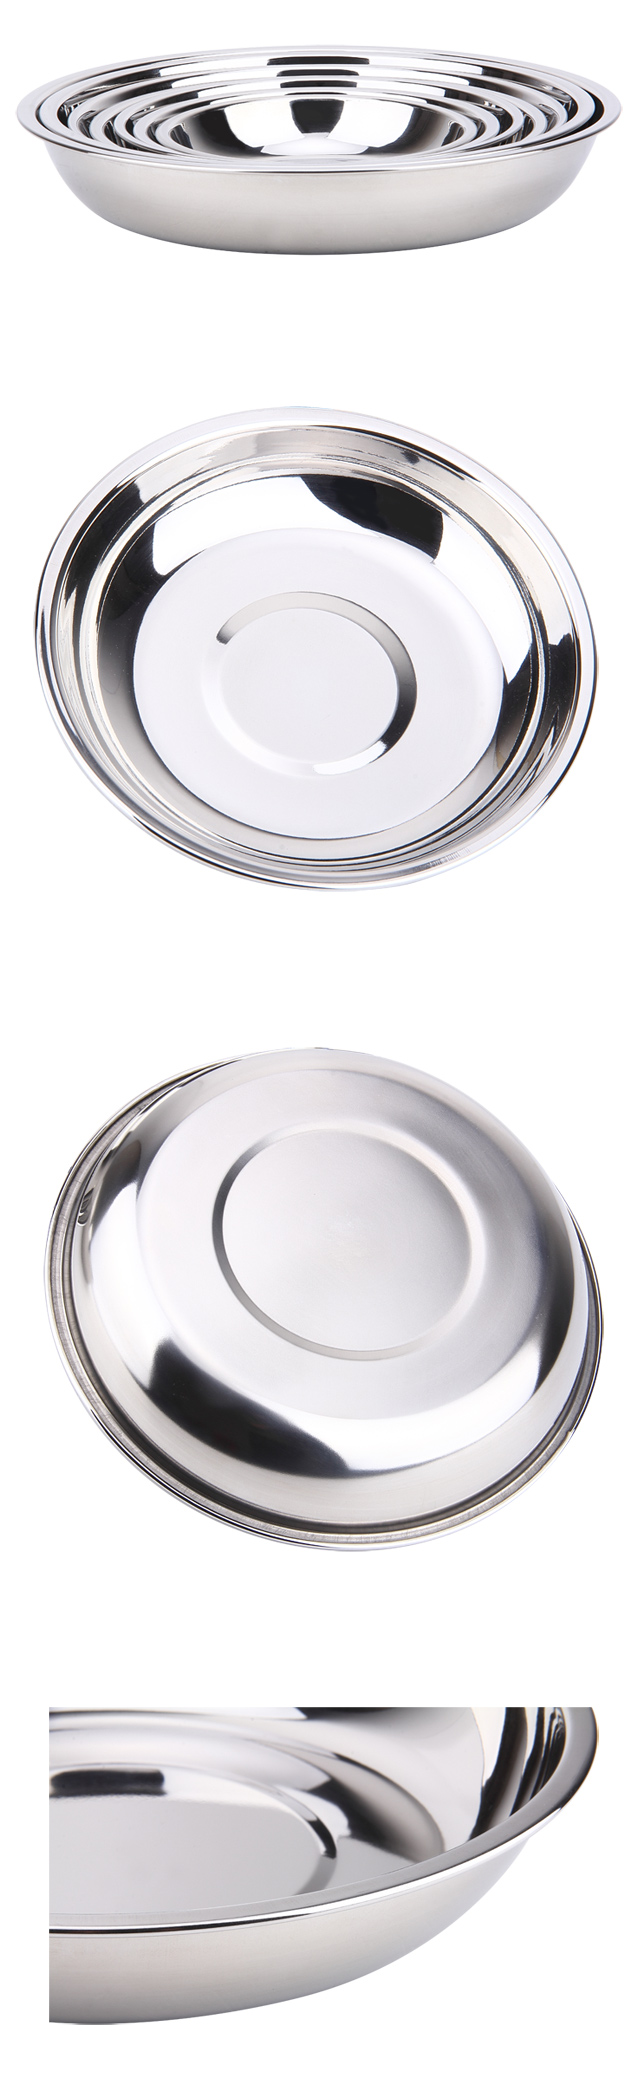 Hot Sell Thickening Deep Stainless Steel Dinner Soup Plate & Dish Plate